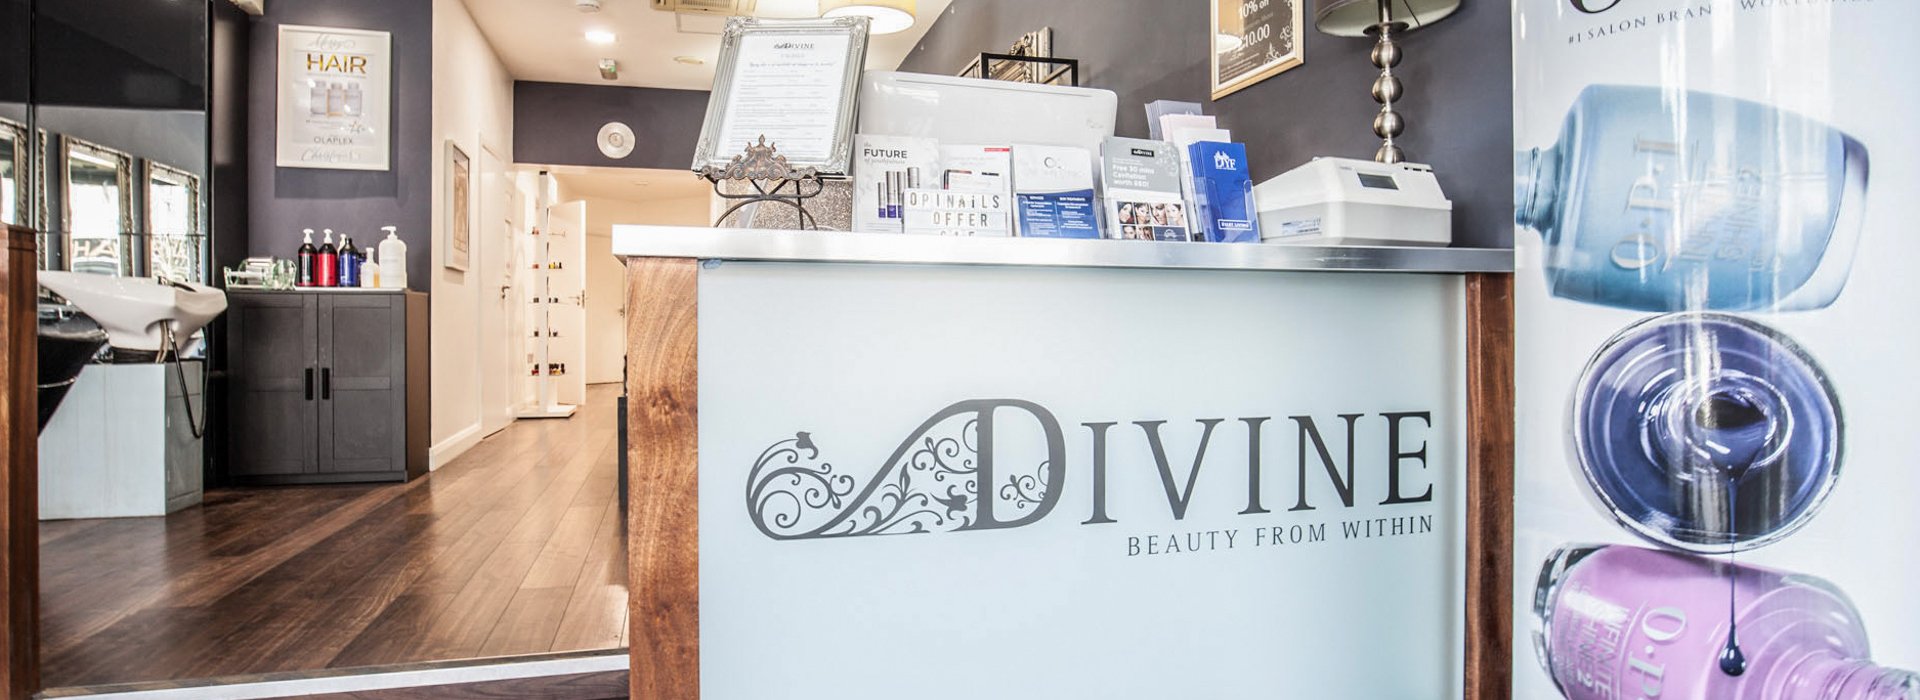 HAIR BEAUTY LASER AT DIVINE